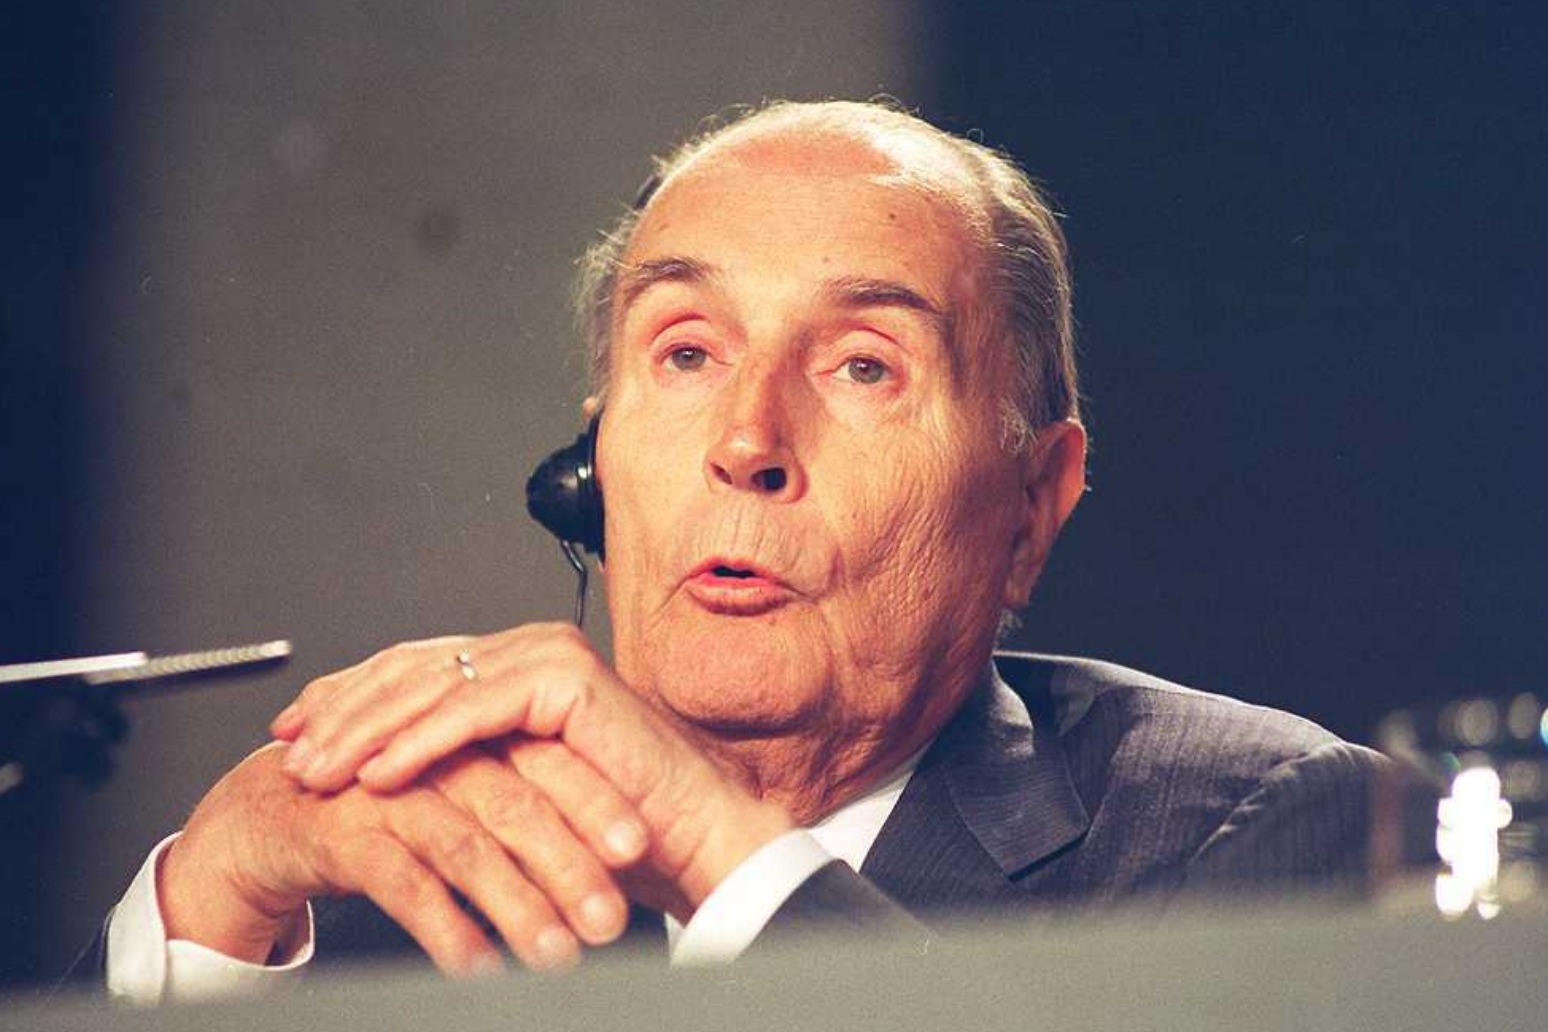 UK Government knew of Mitterrand’s secret health woes years before French public 